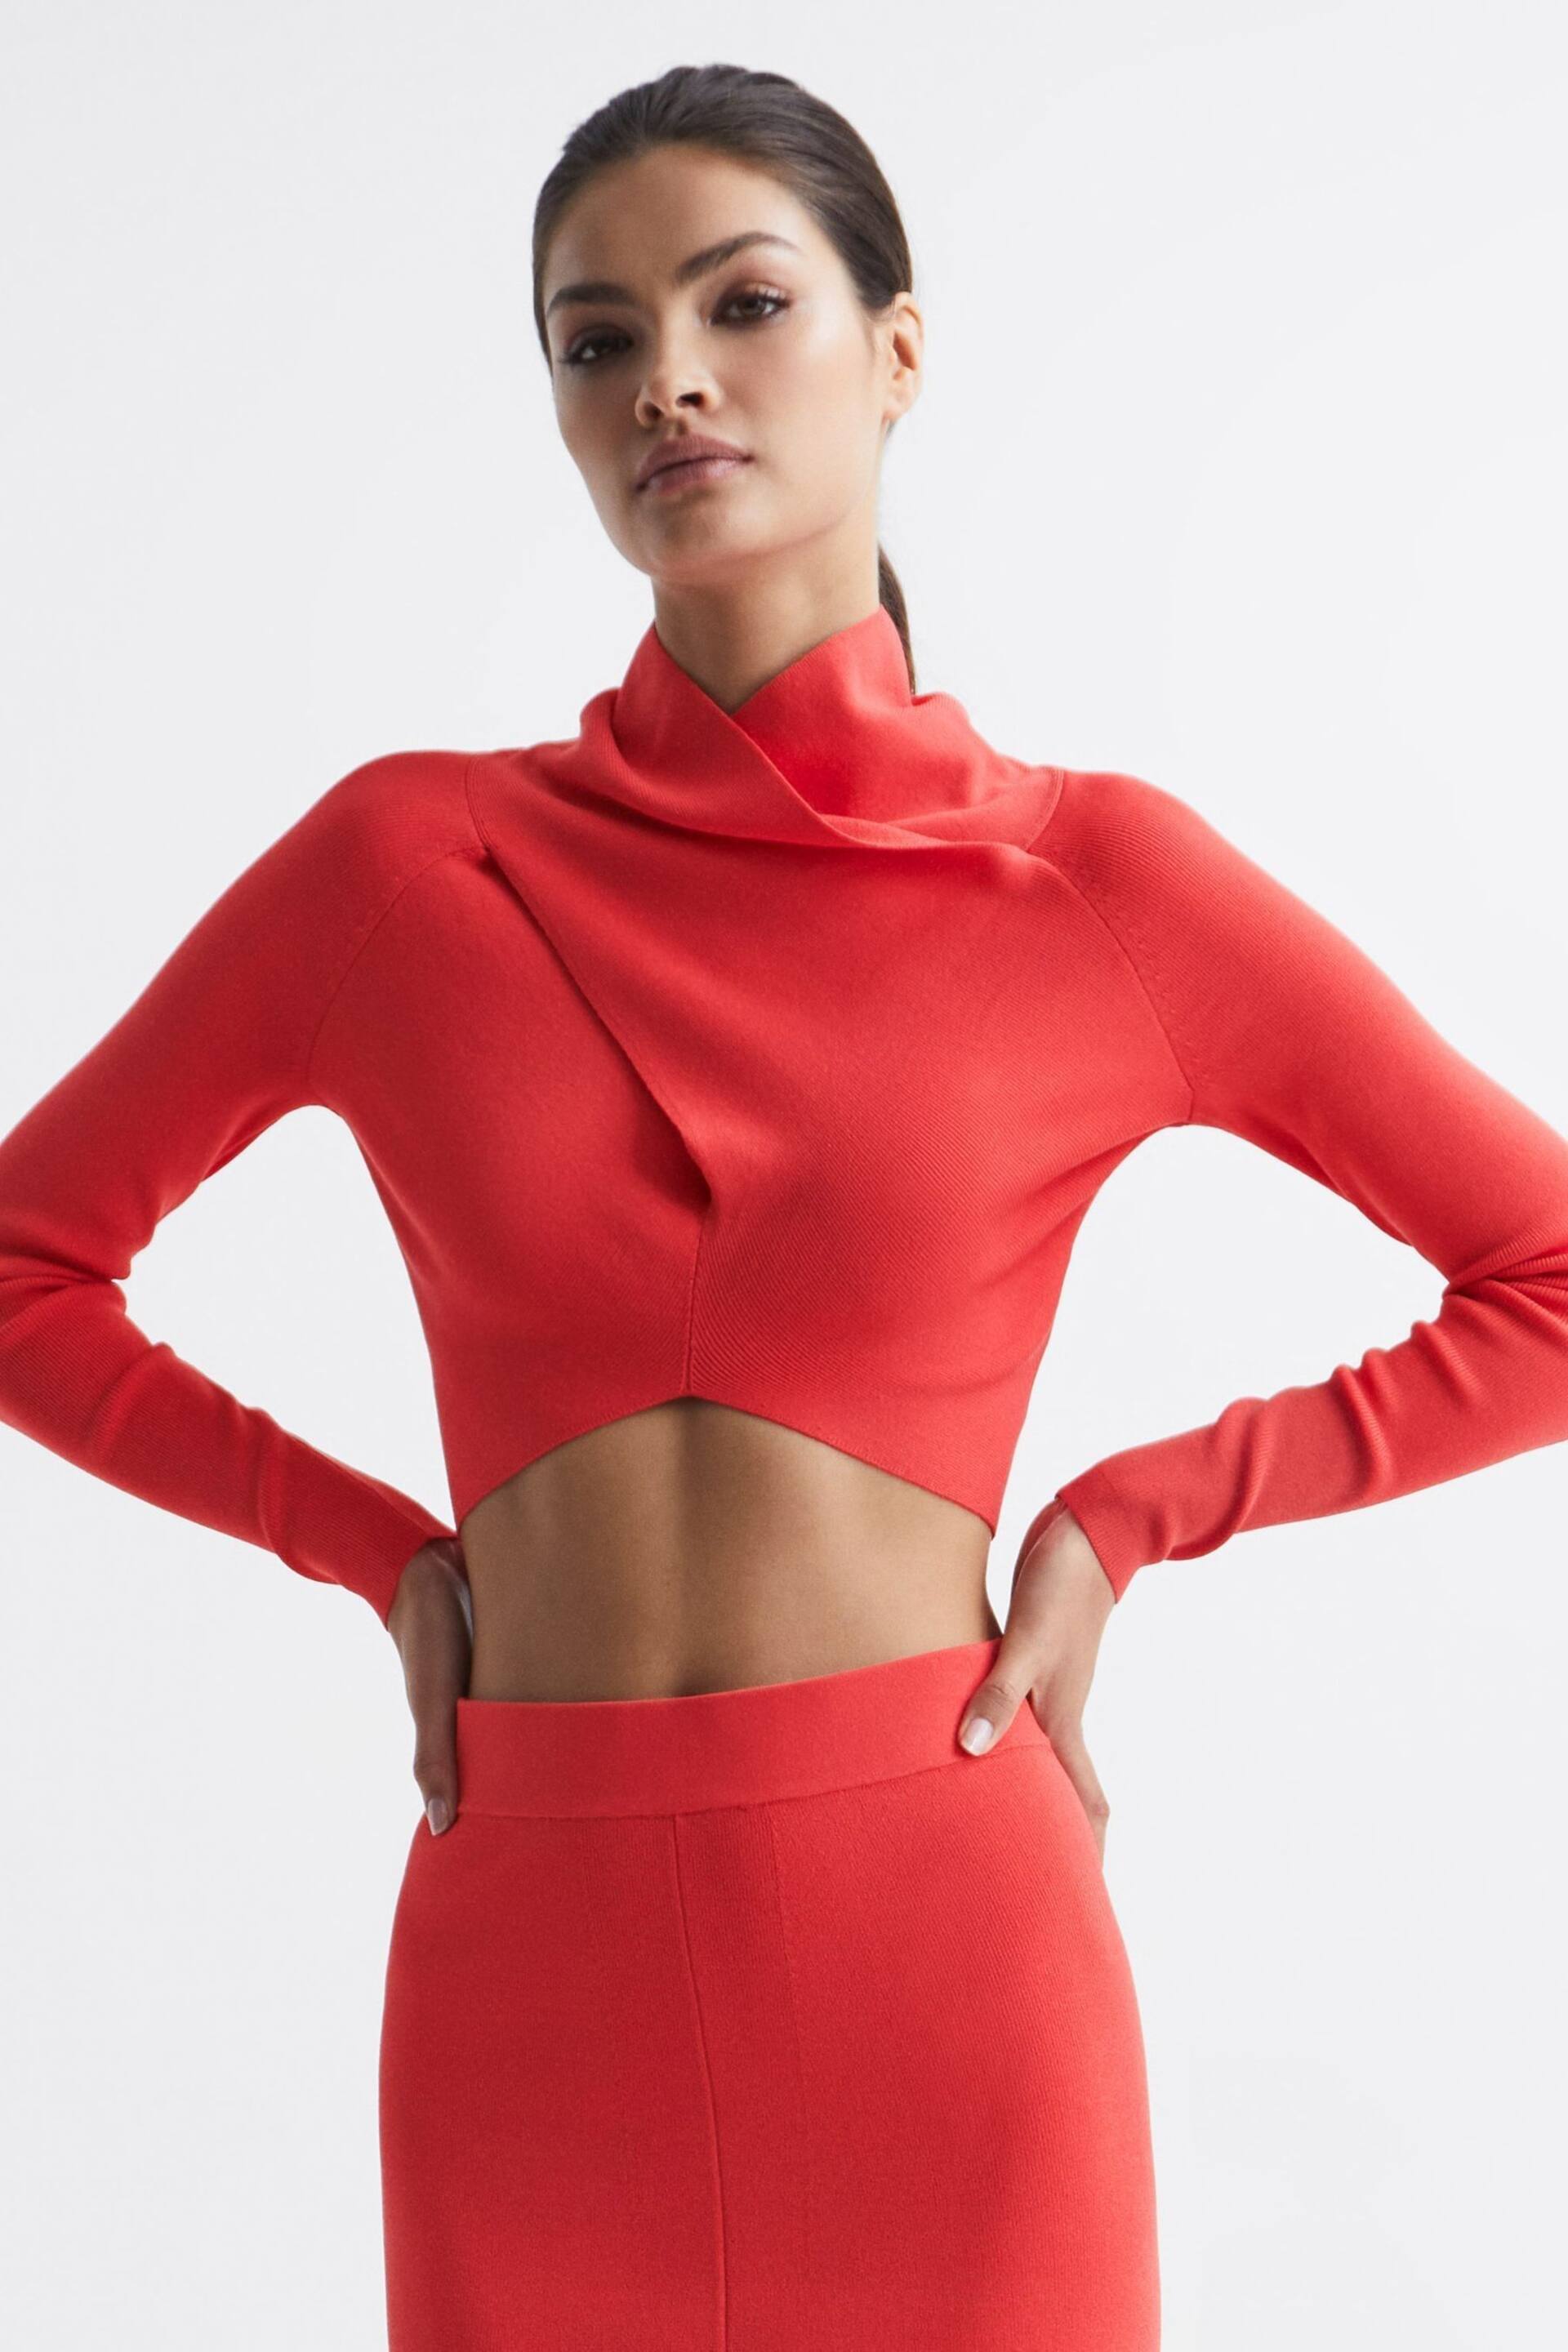 Reiss Coral Elsie High Neck Cropped Co Ord Top - Image 1 of 5